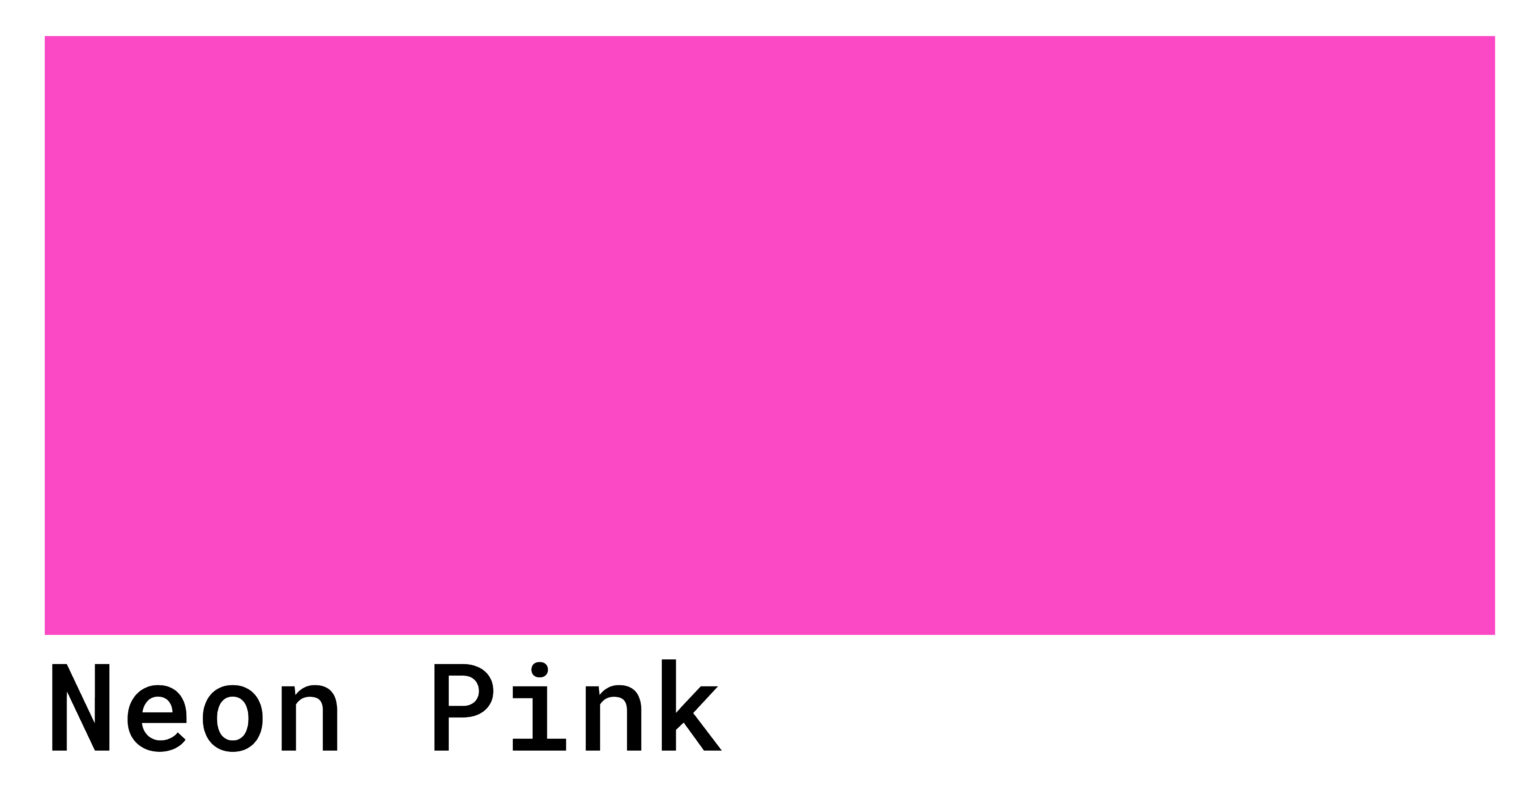 vector code for hot pink